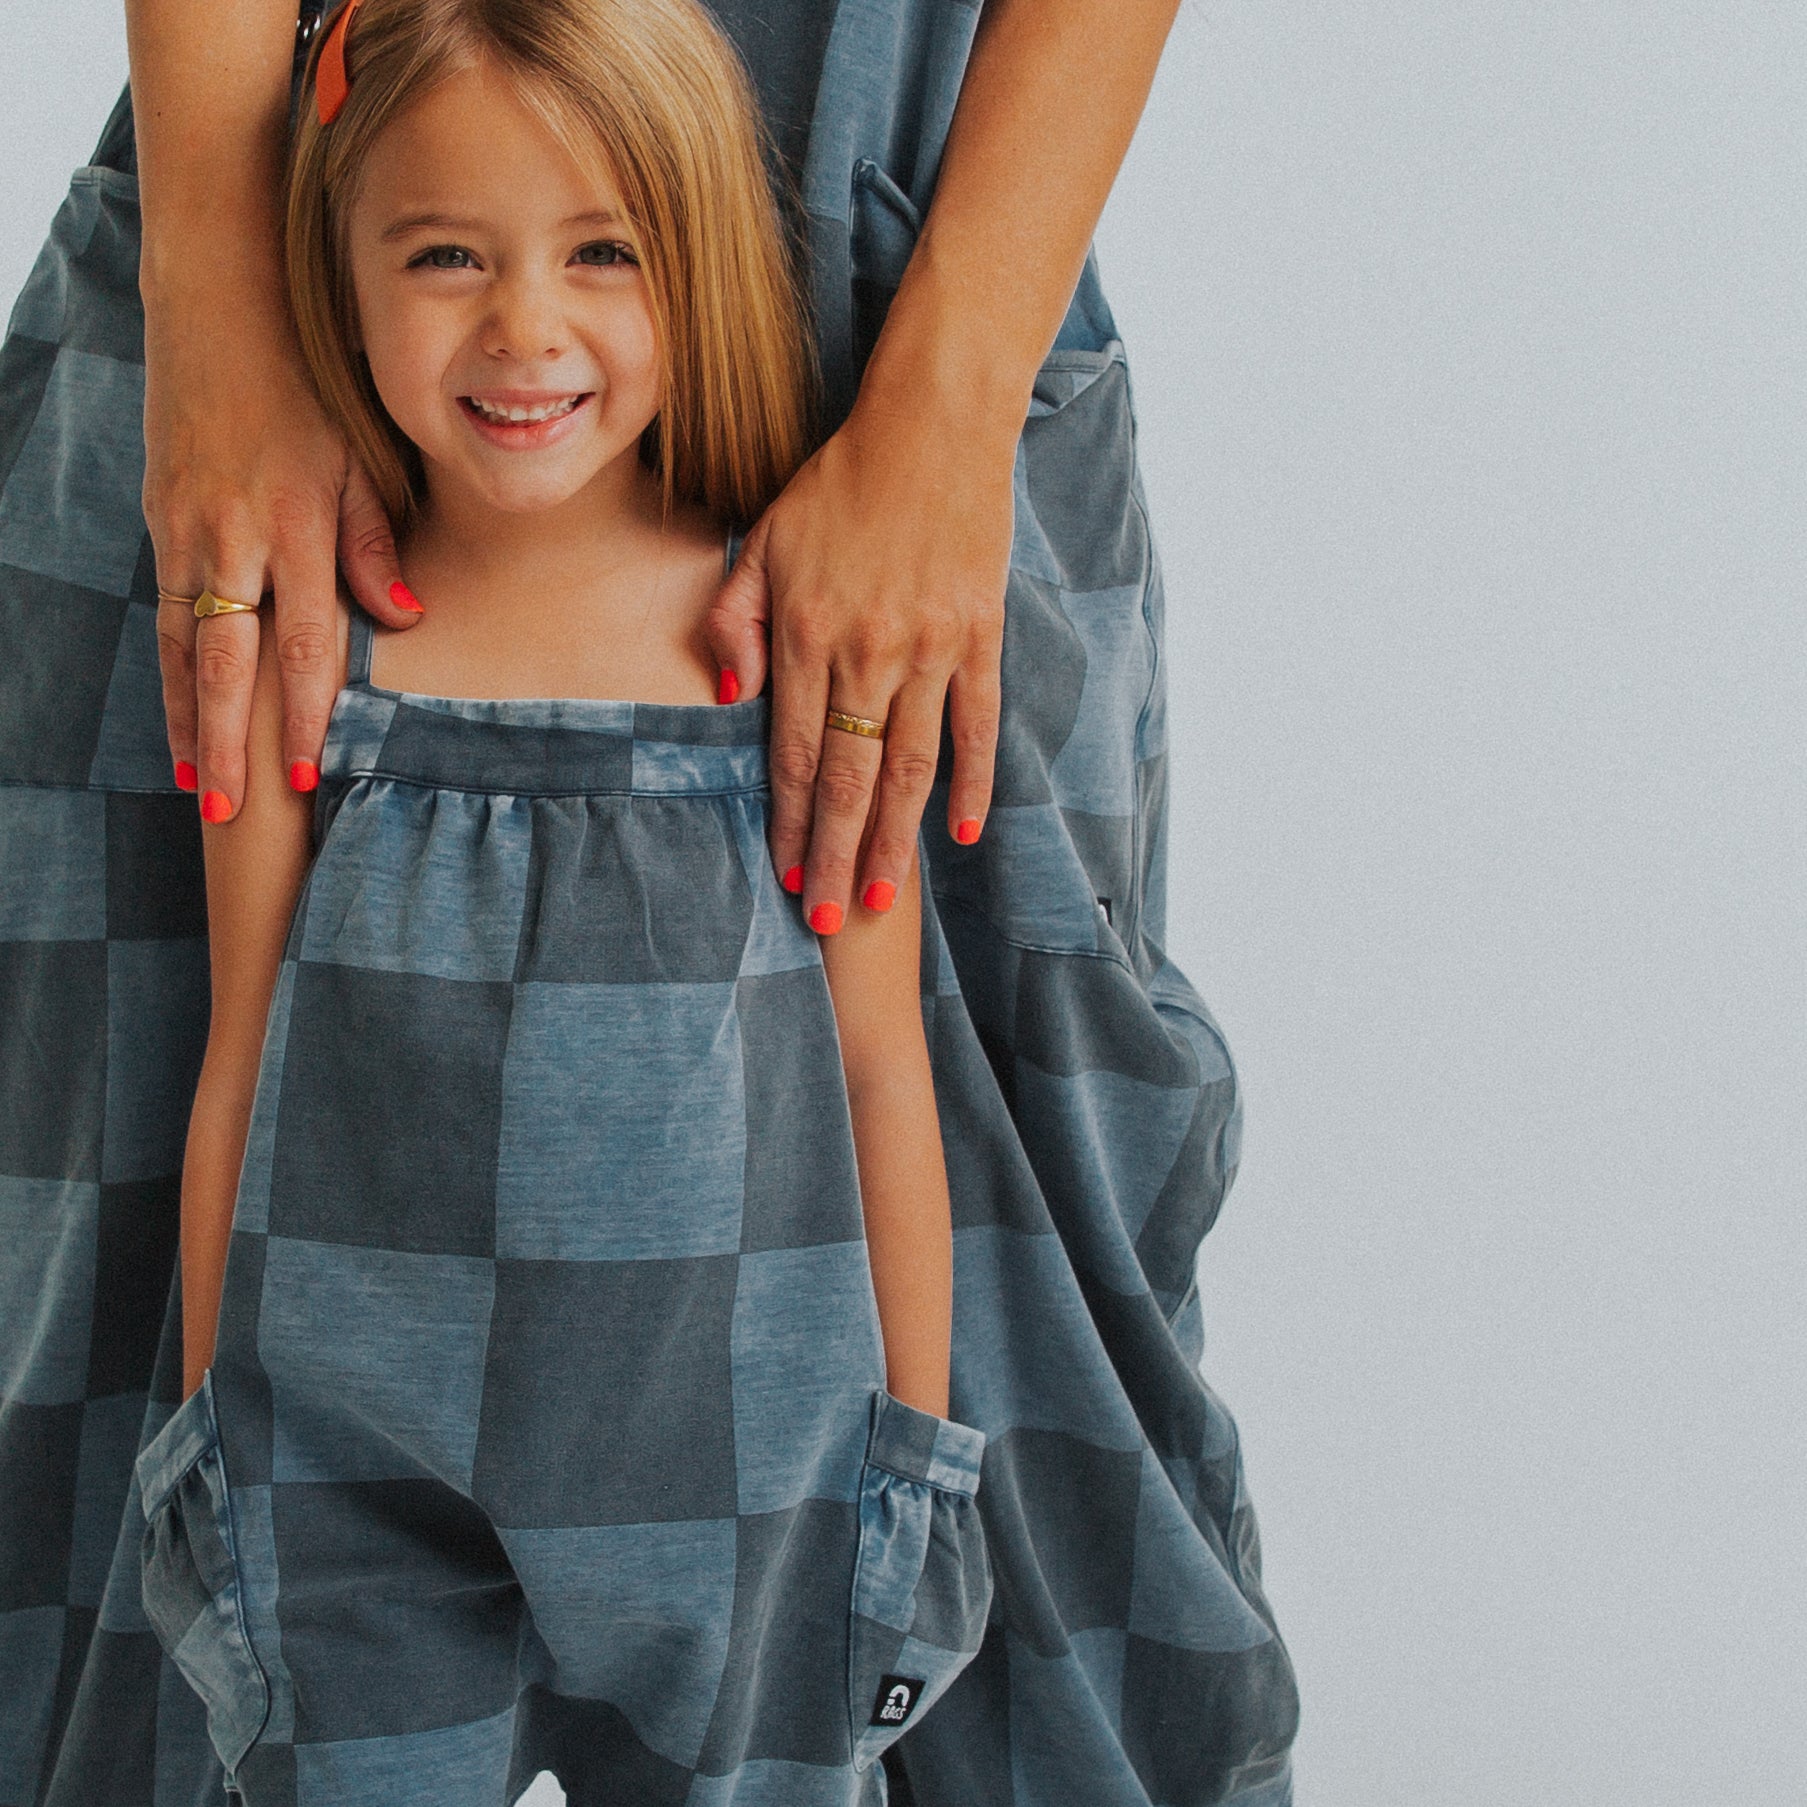 Gathered Strappy Tank Rag Romper With Side Pockets- Blue Denim Check